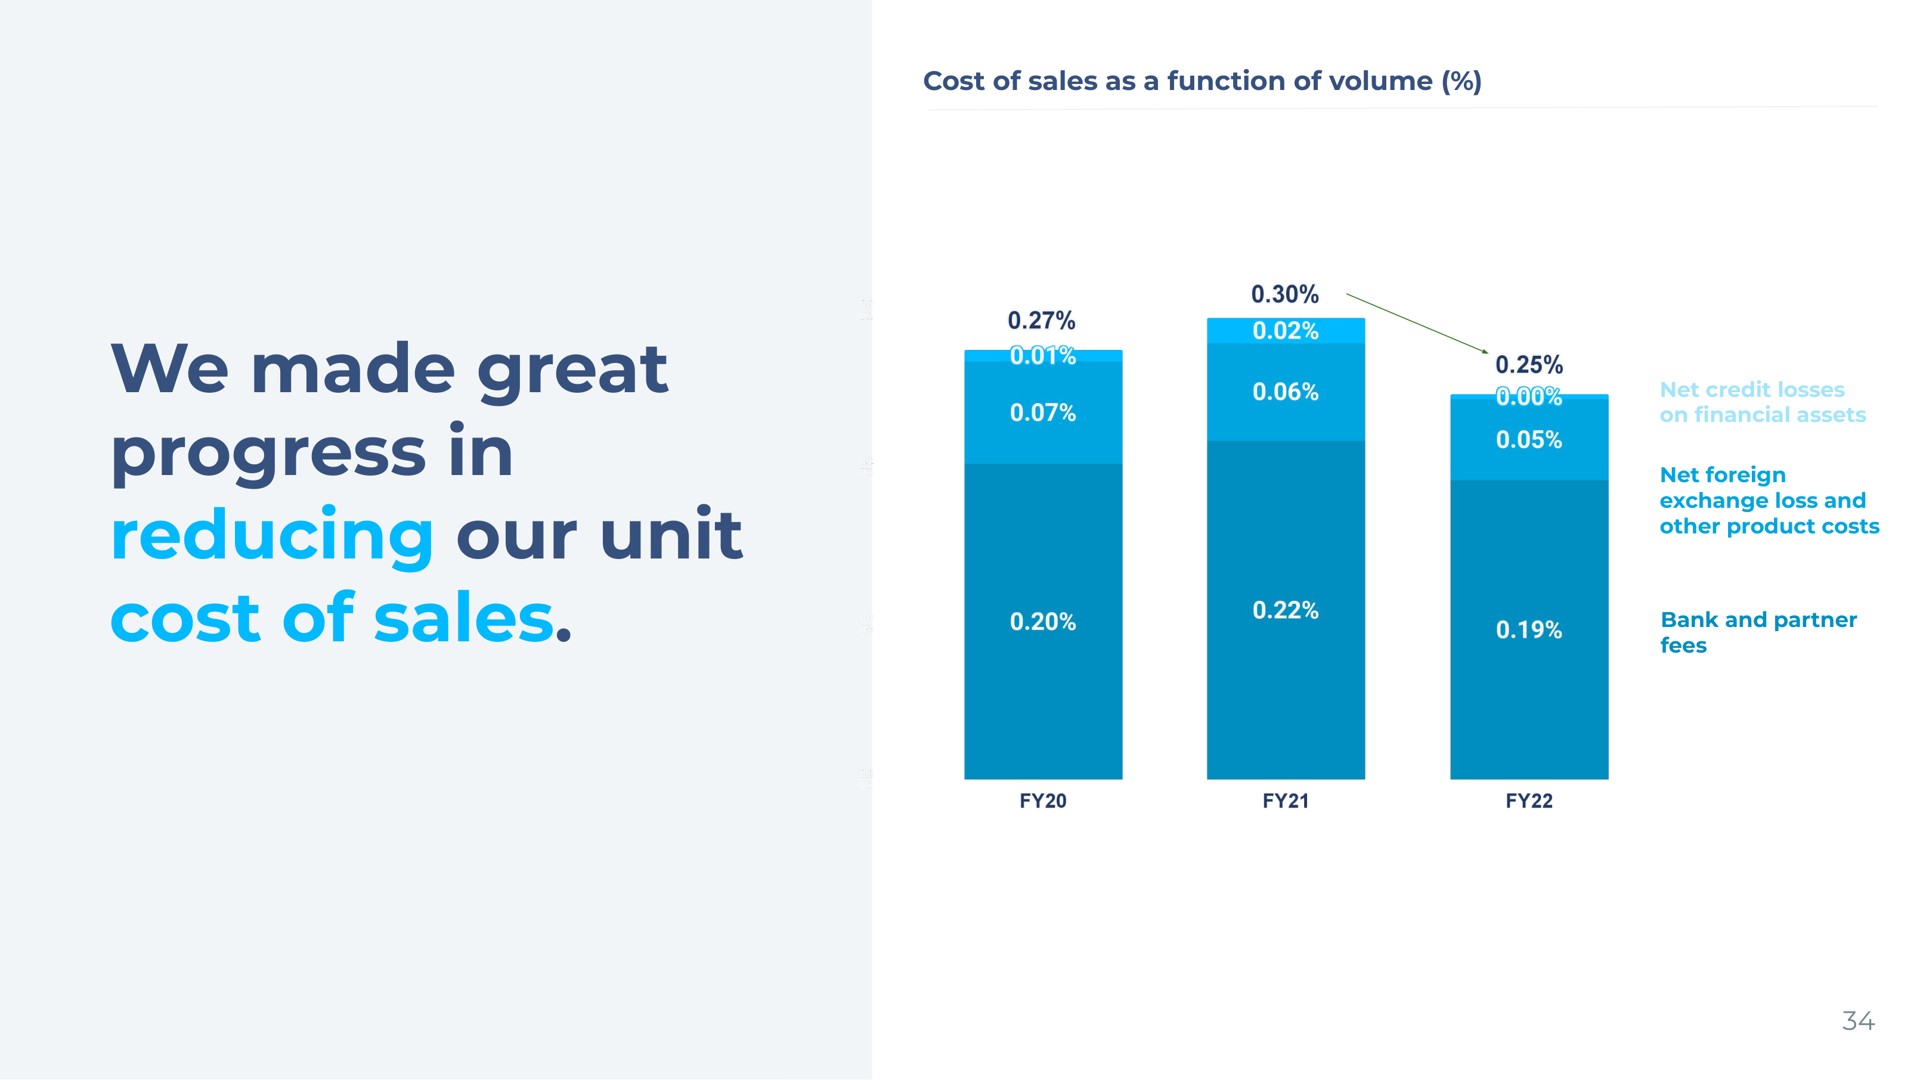 cost of sales as a function of volume we made great progress in reducing our unit cost of sales | Wise